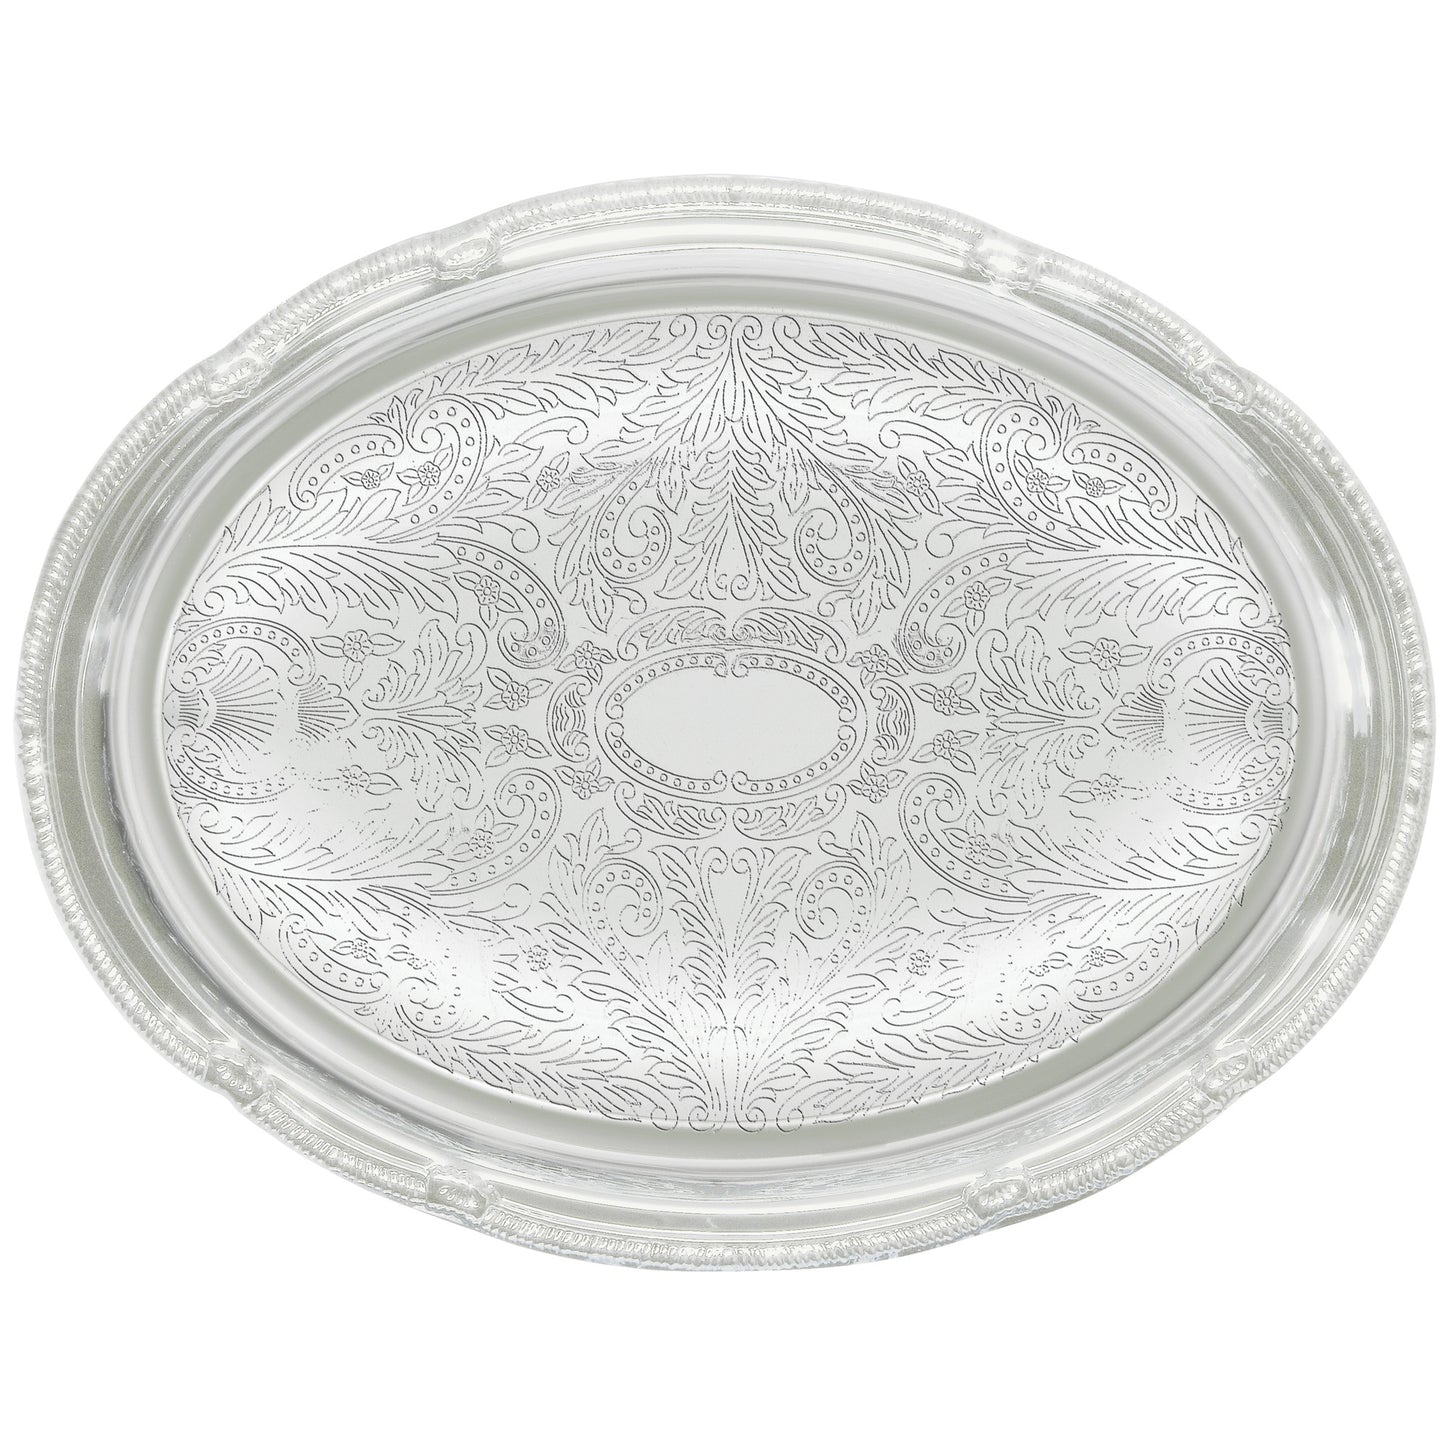 CMT-1014 - Chrome-Plated Serving Tray - Oval, 14-3/4 x 10-1/2